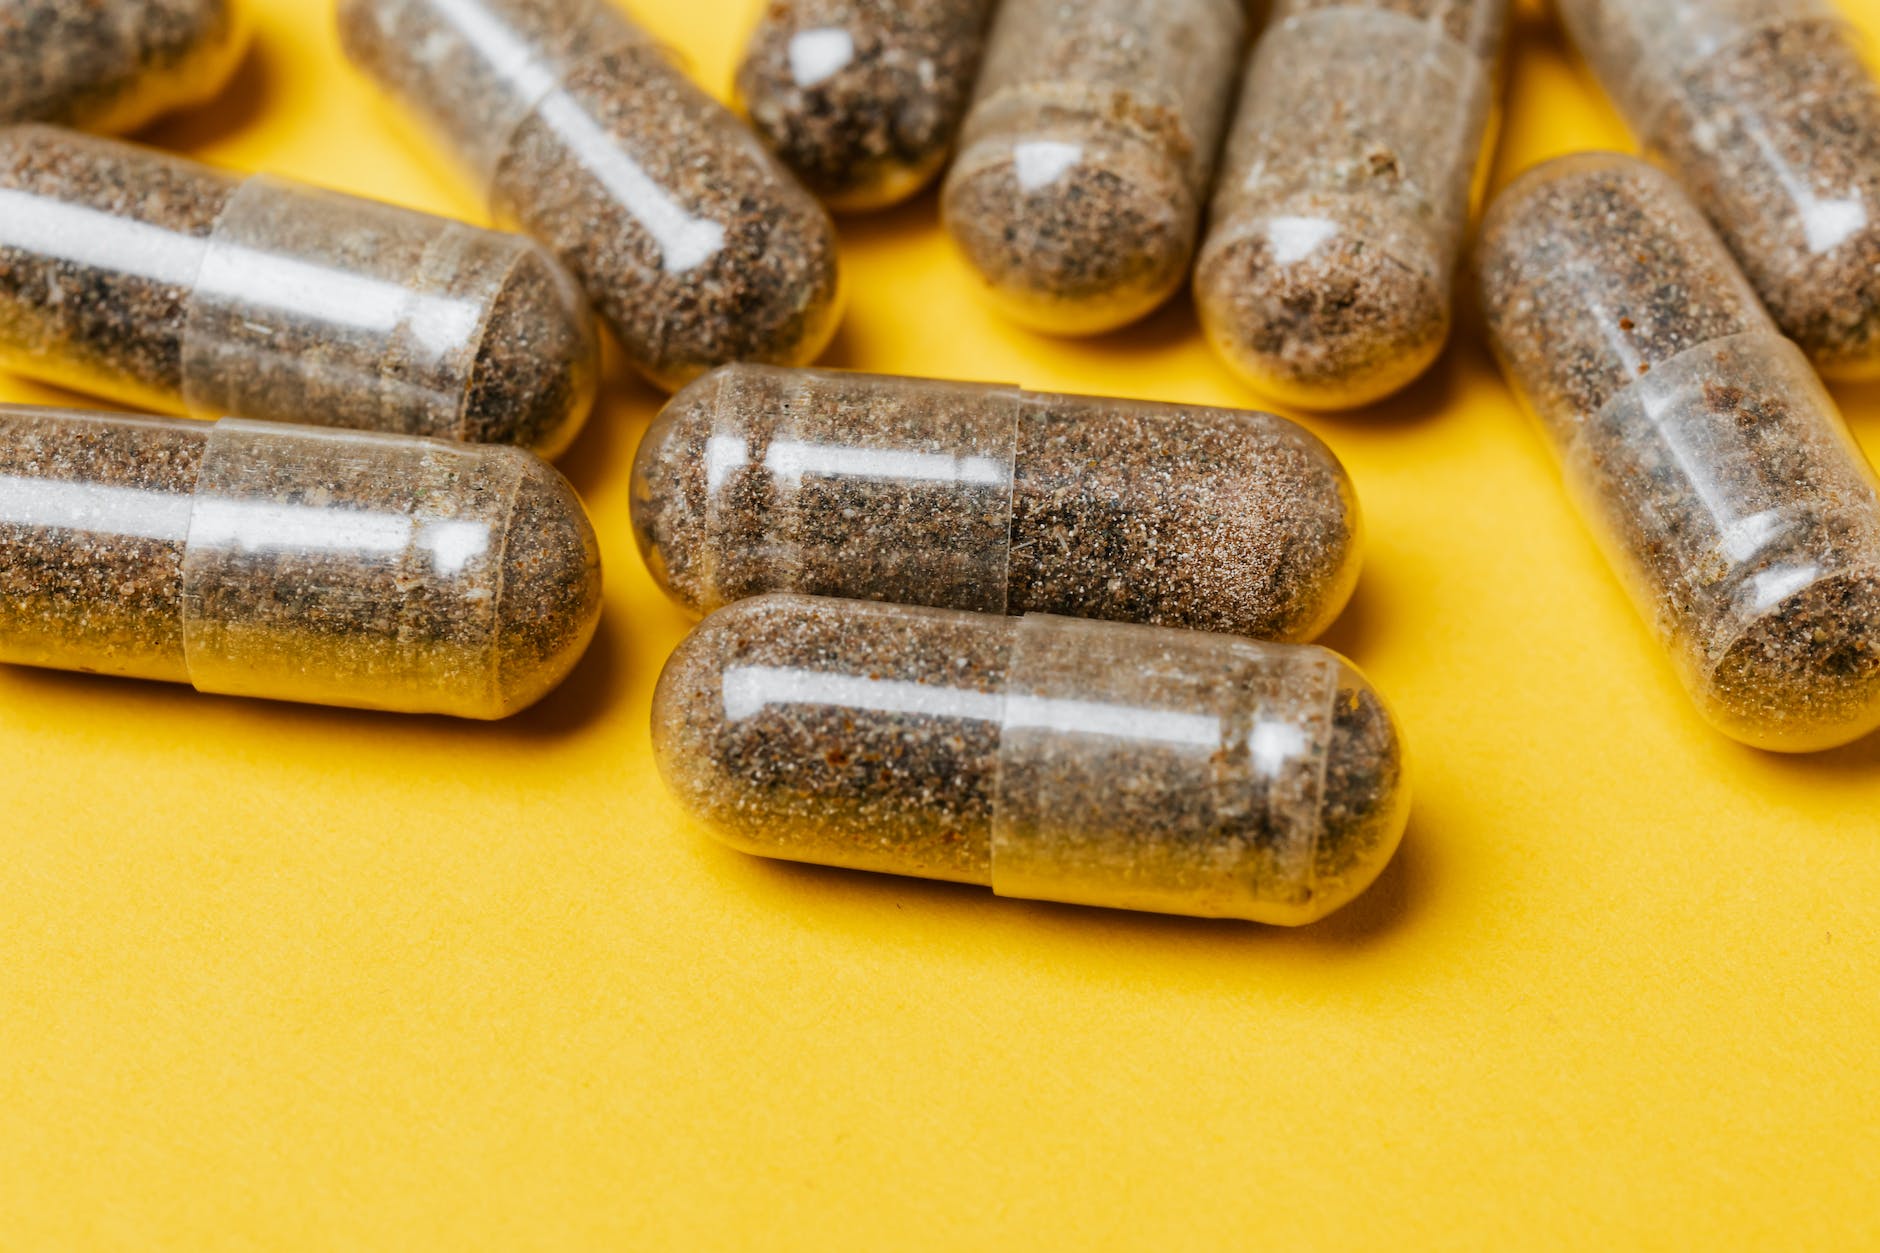 capsules on yellow surface